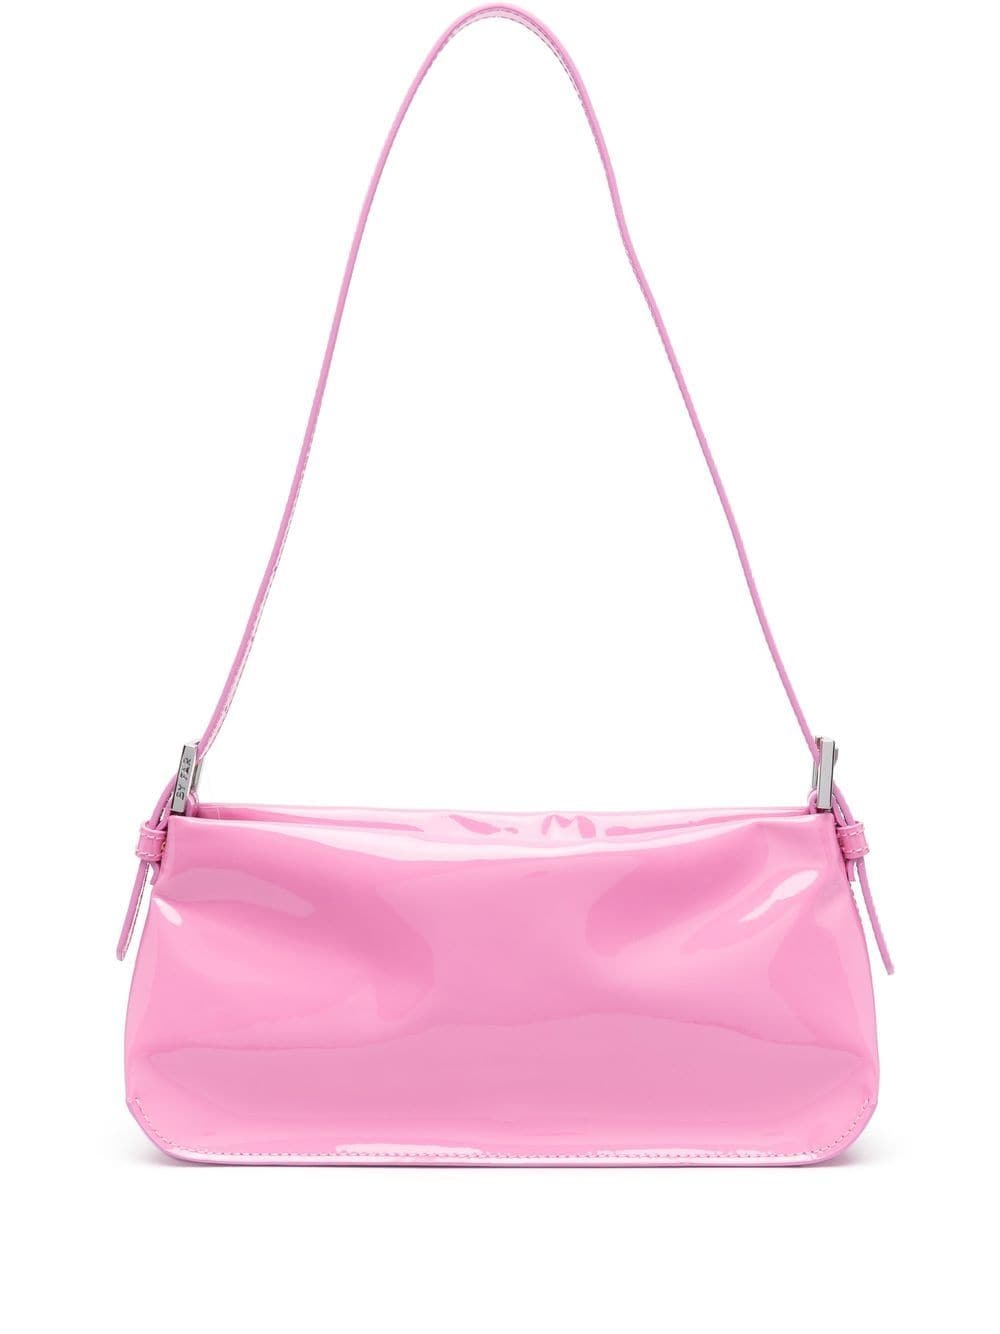 BY FAR Dulce patent leather shoulder bag - Pink von BY FAR